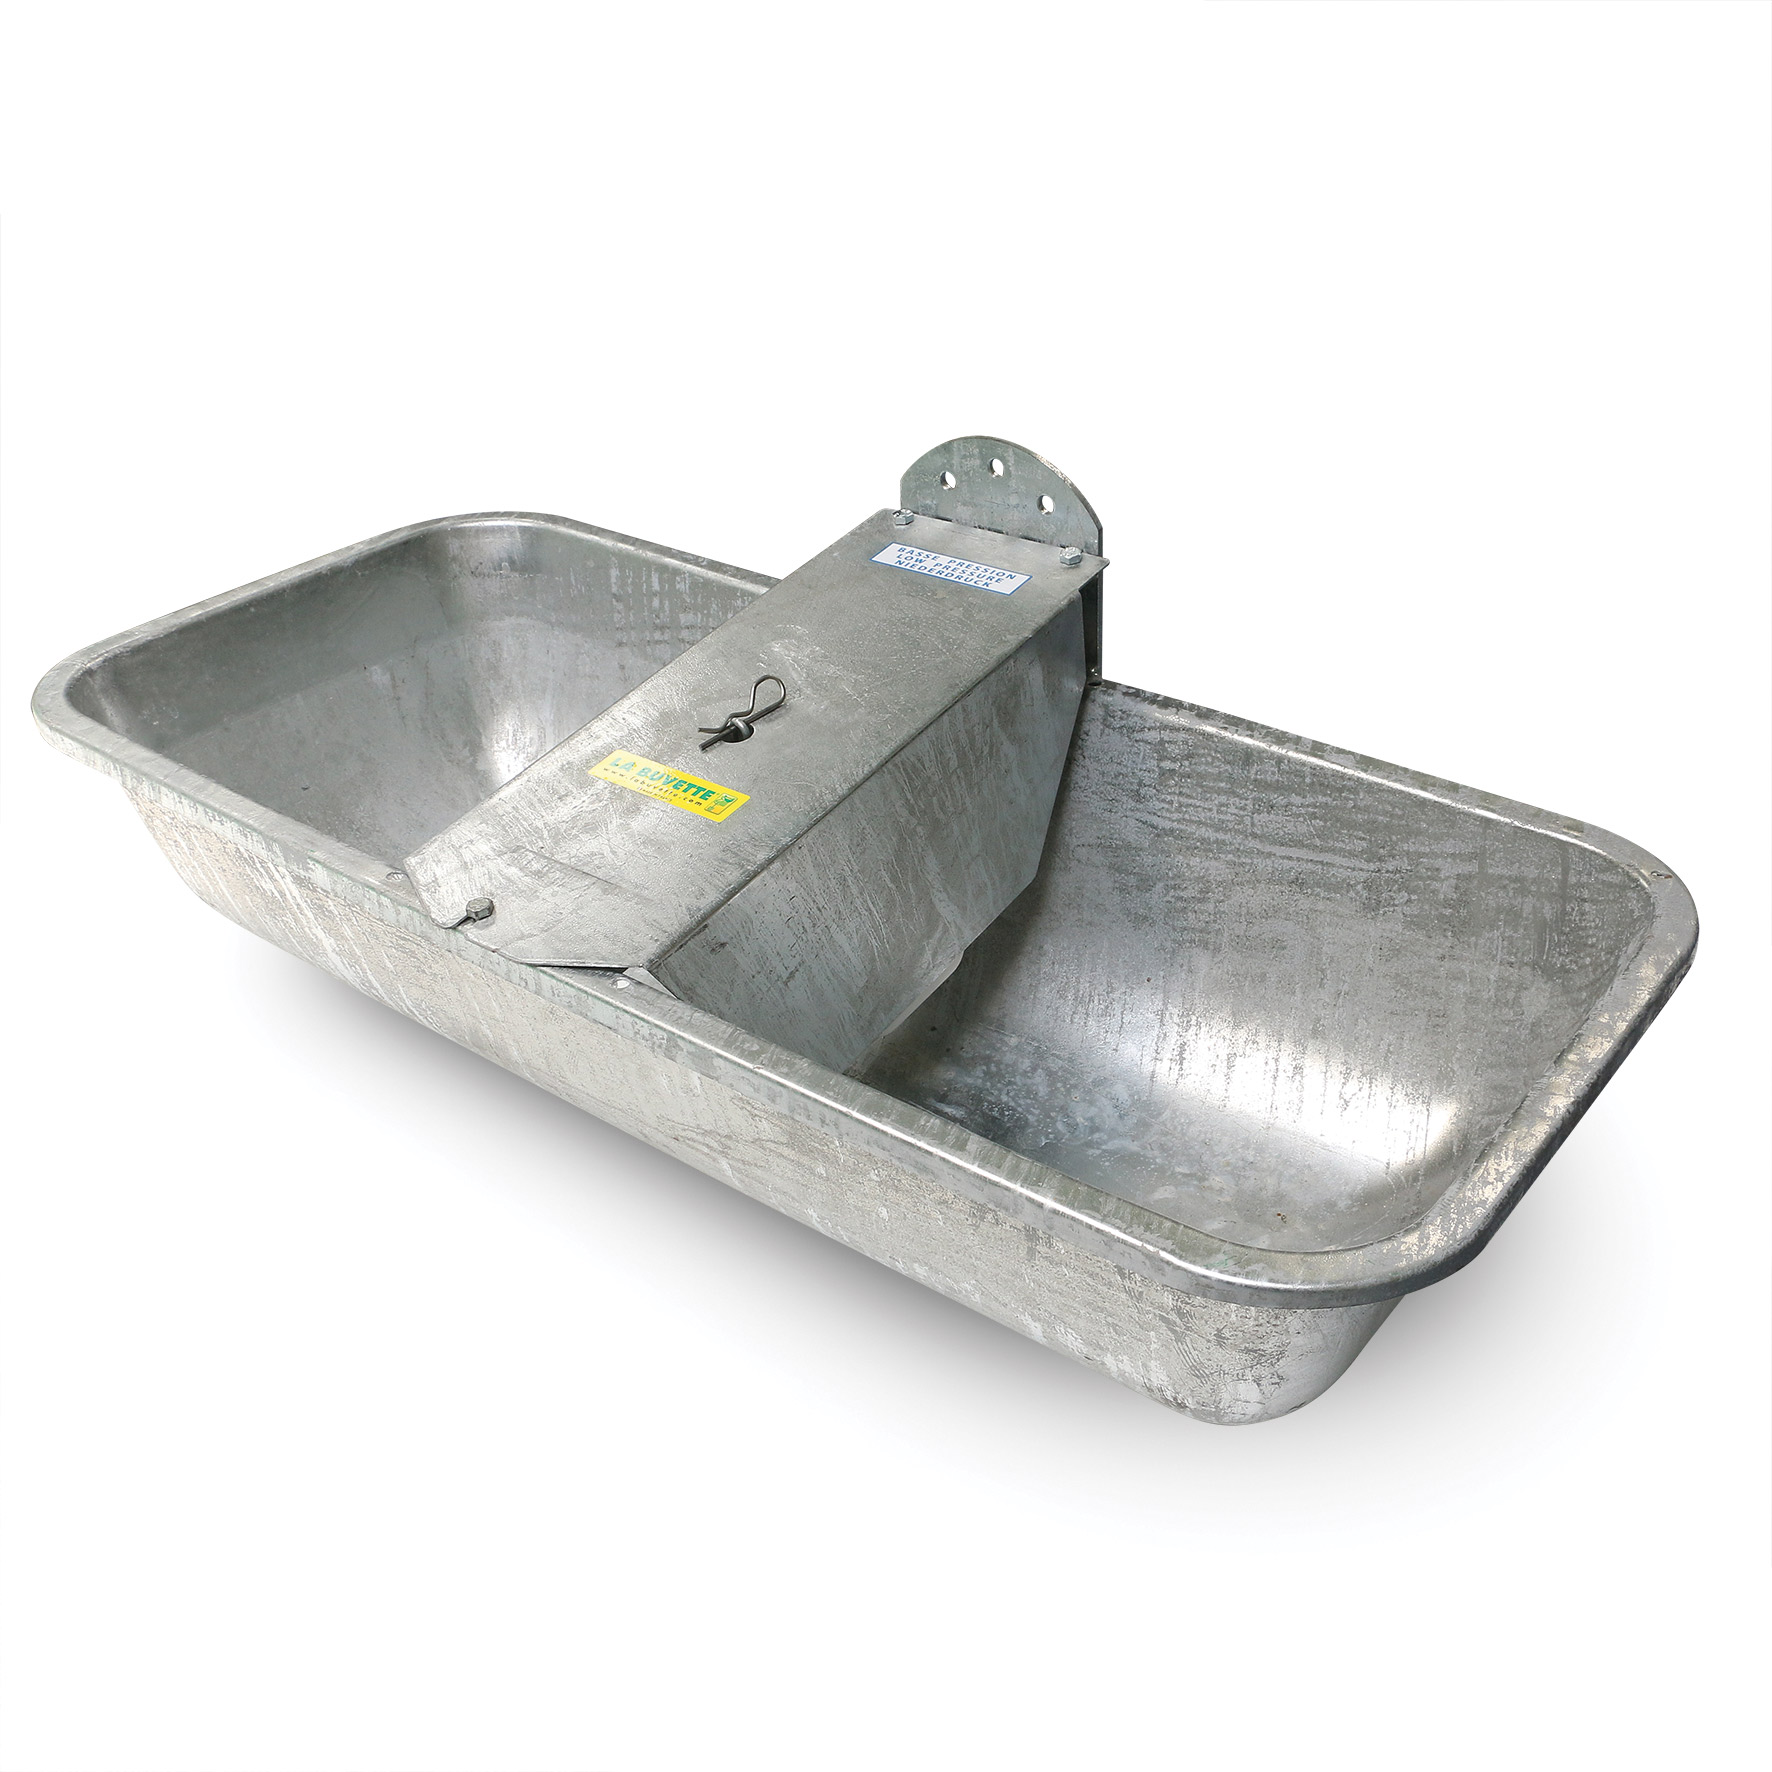 GALVALAC 65T Drinking Trough for Tank